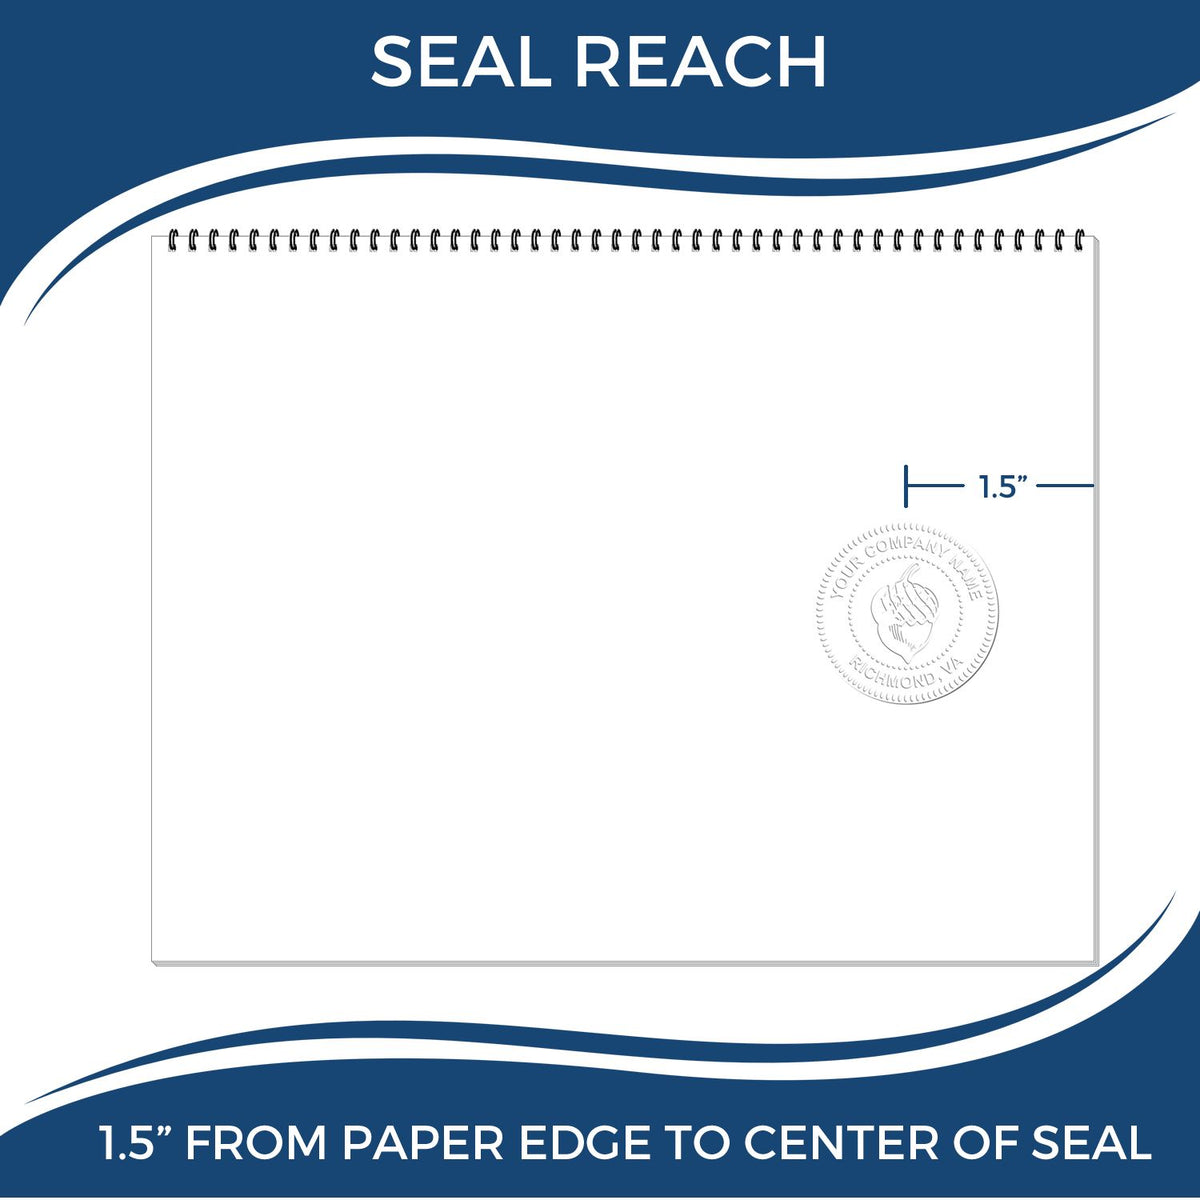 An infographic showing the seal reach which is represented by a ruler and a miniature seal image of the Hybrid Tennessee Engineer Seal